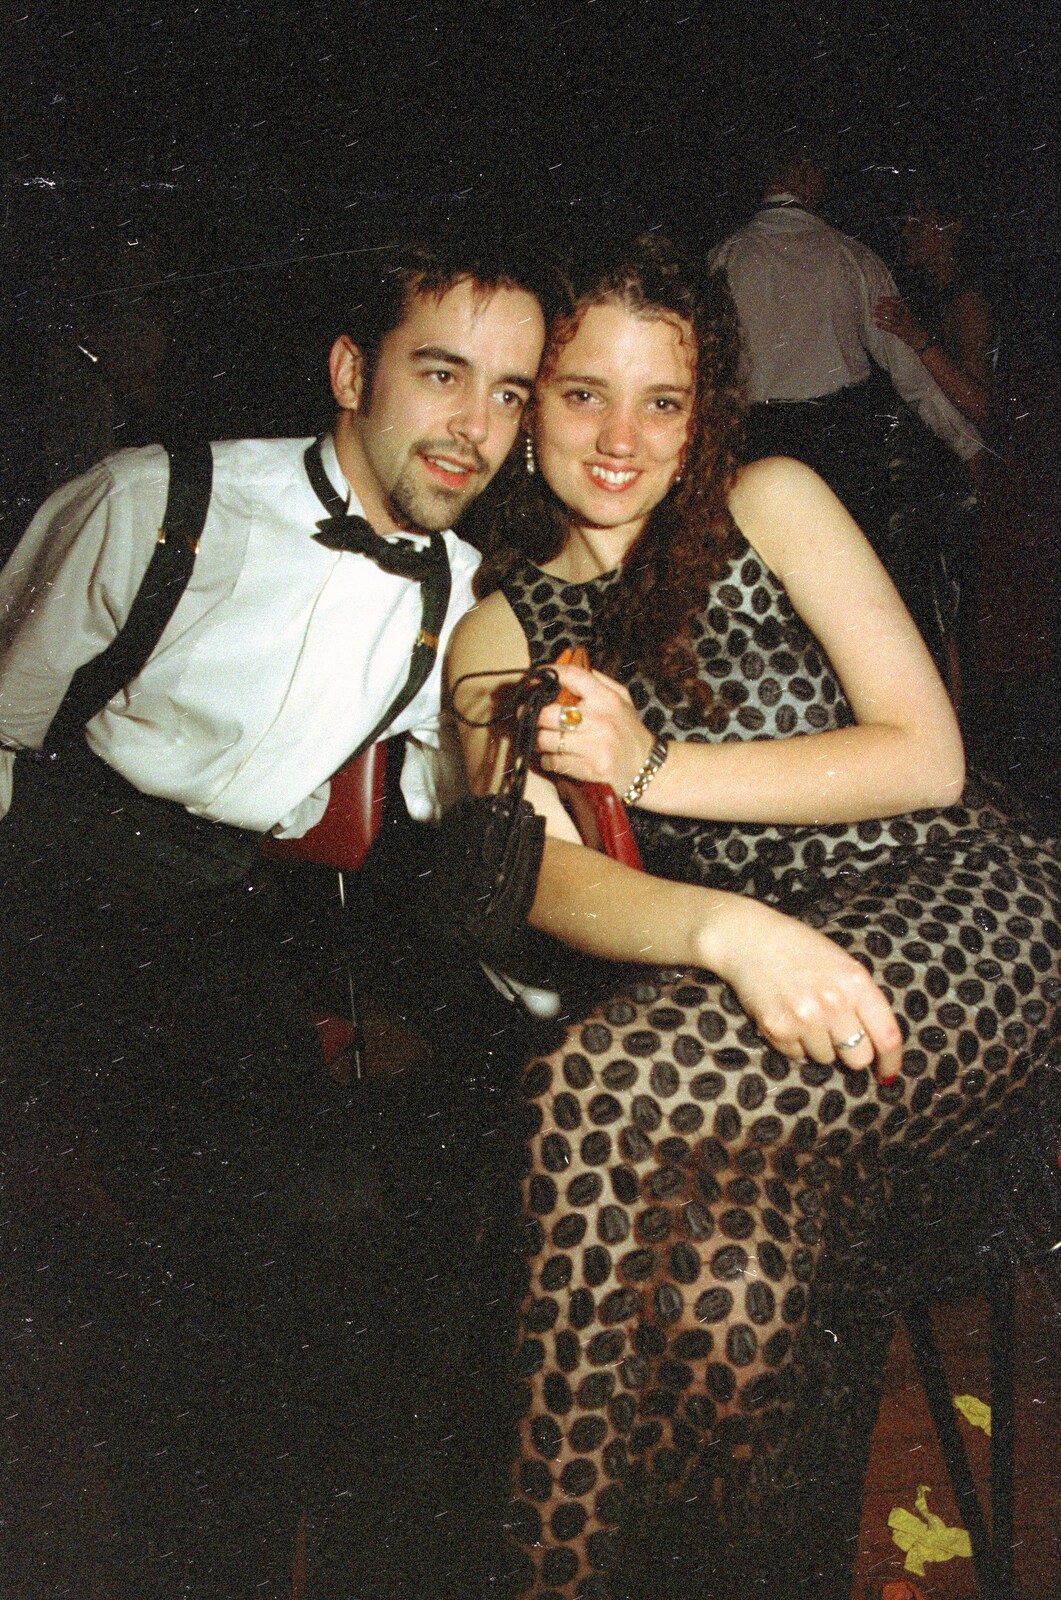 Trevor and a friend from CISU at the Suffolk College May Ball, Ipswich, Suffolk - 11th May 1997